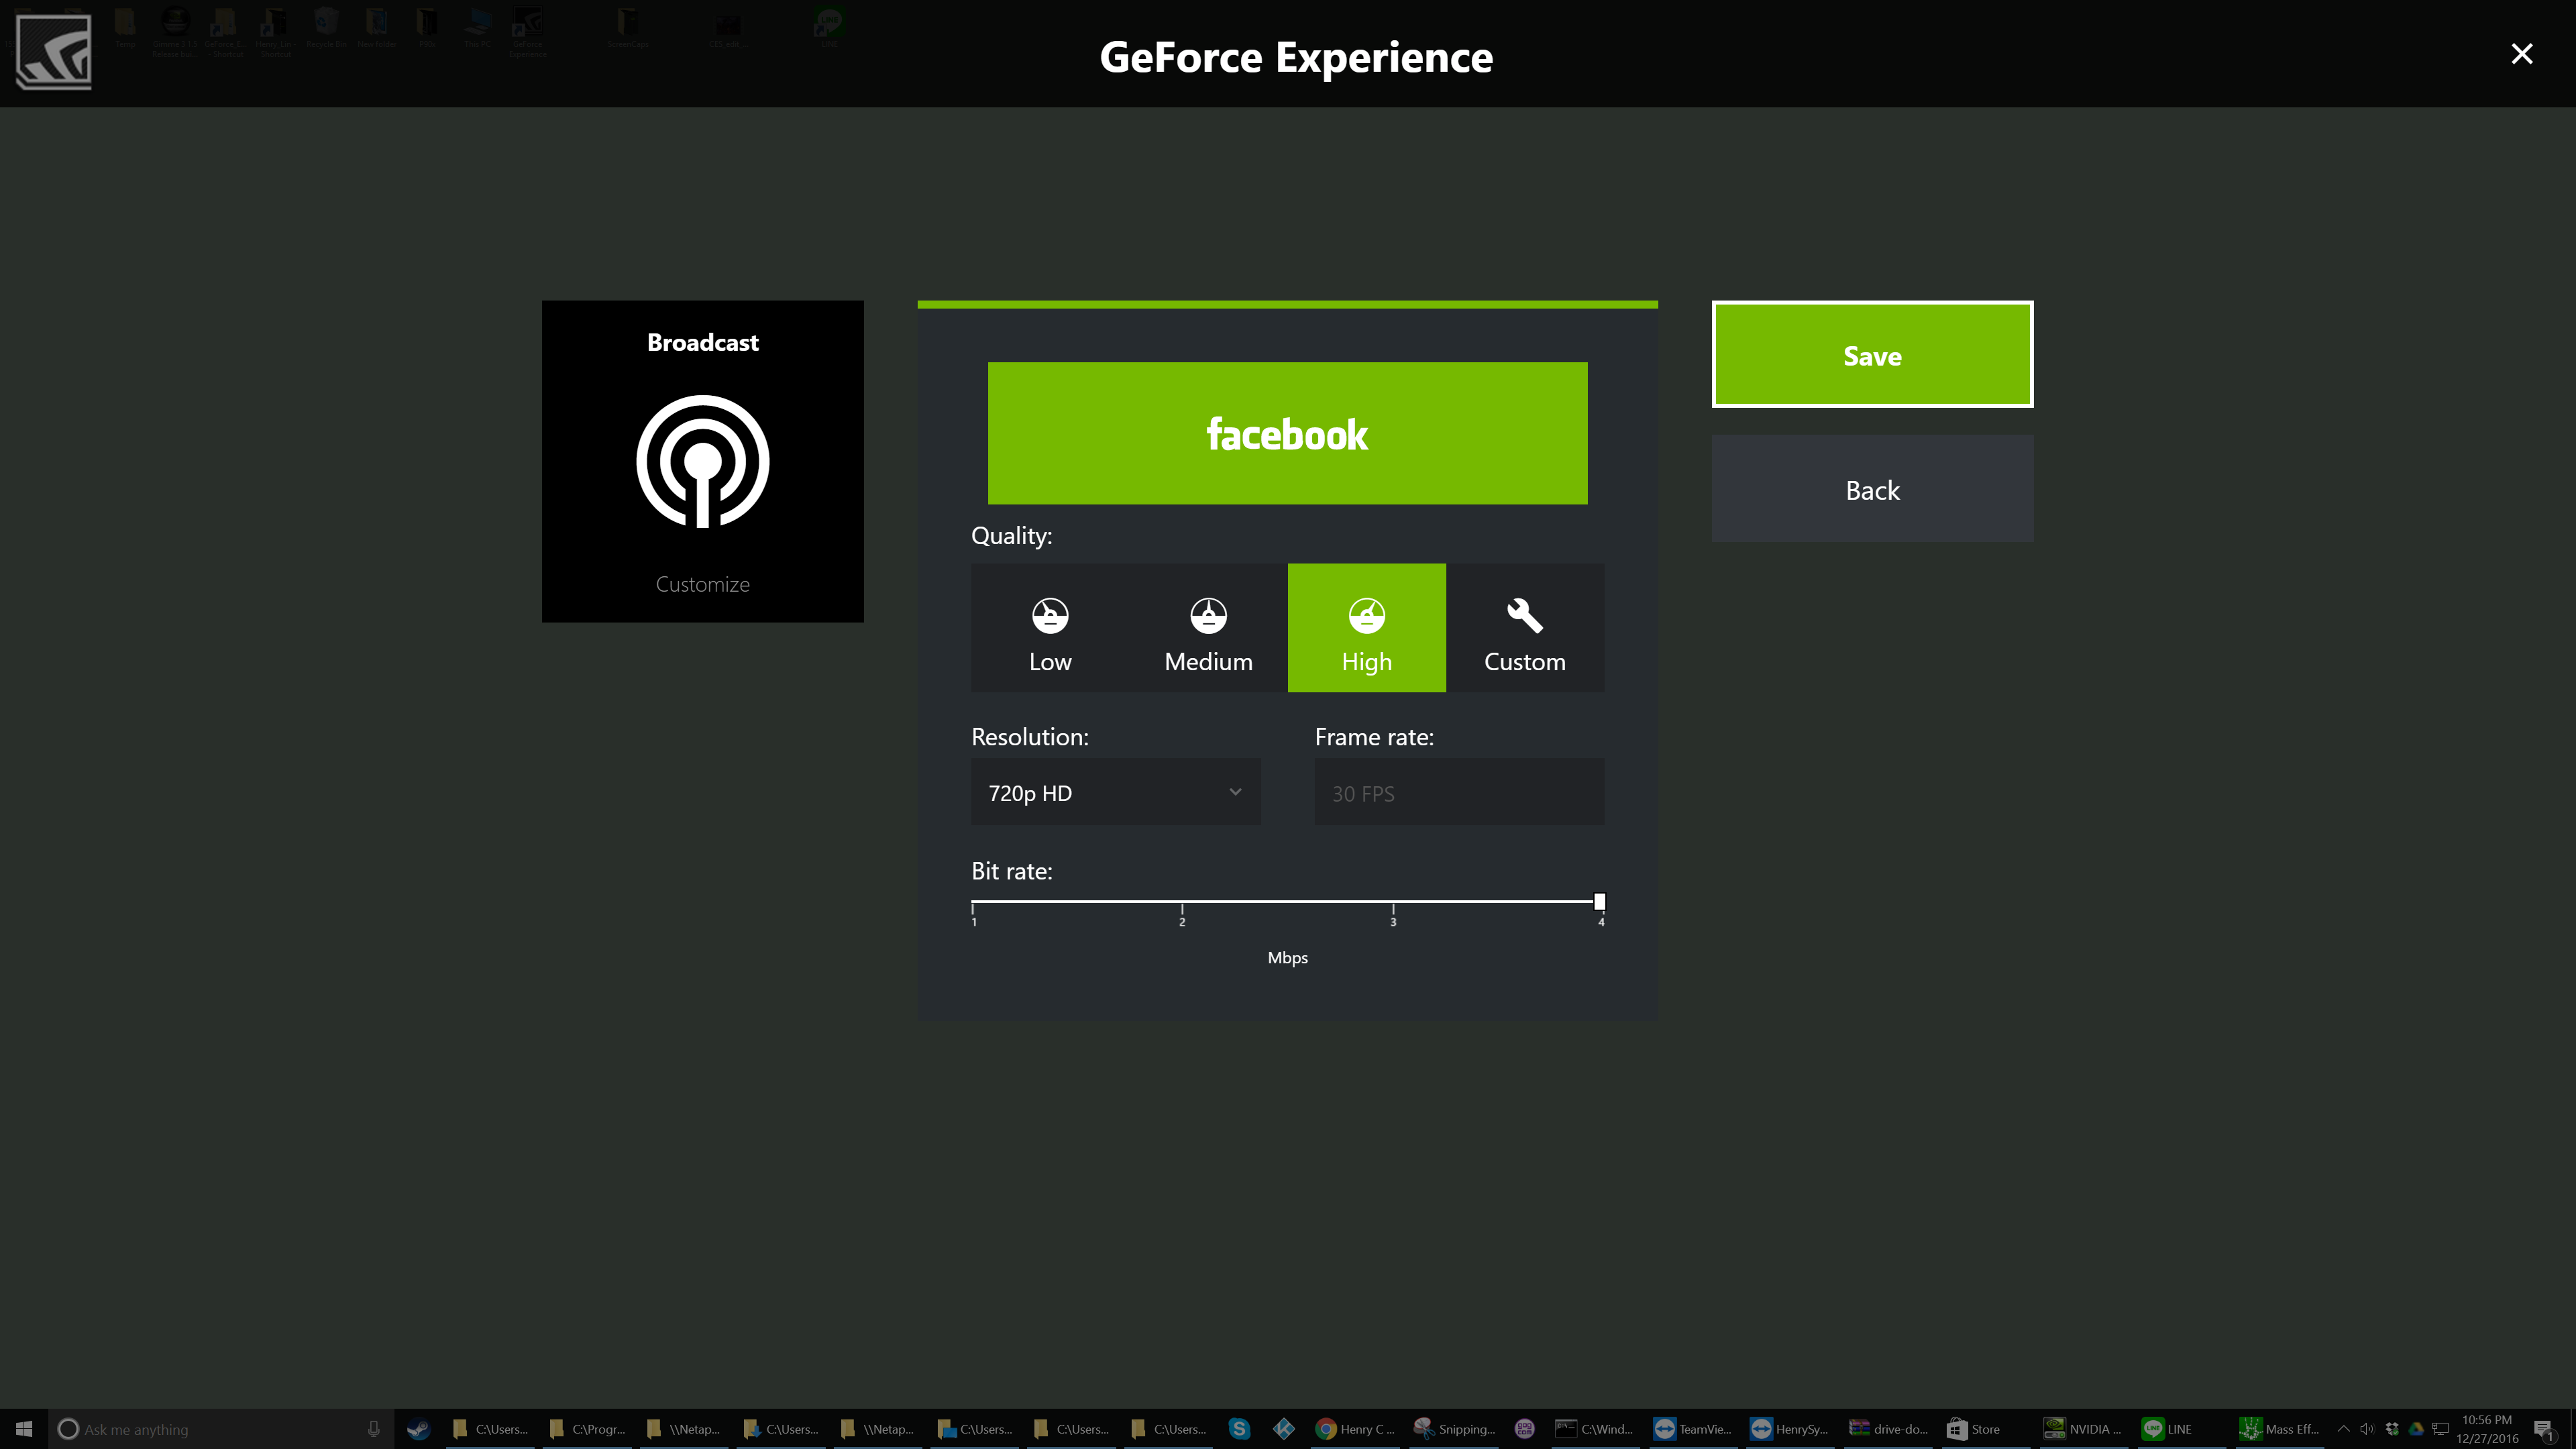 Geforce Experience Connects To Facebook Share Straight To Your Timeline